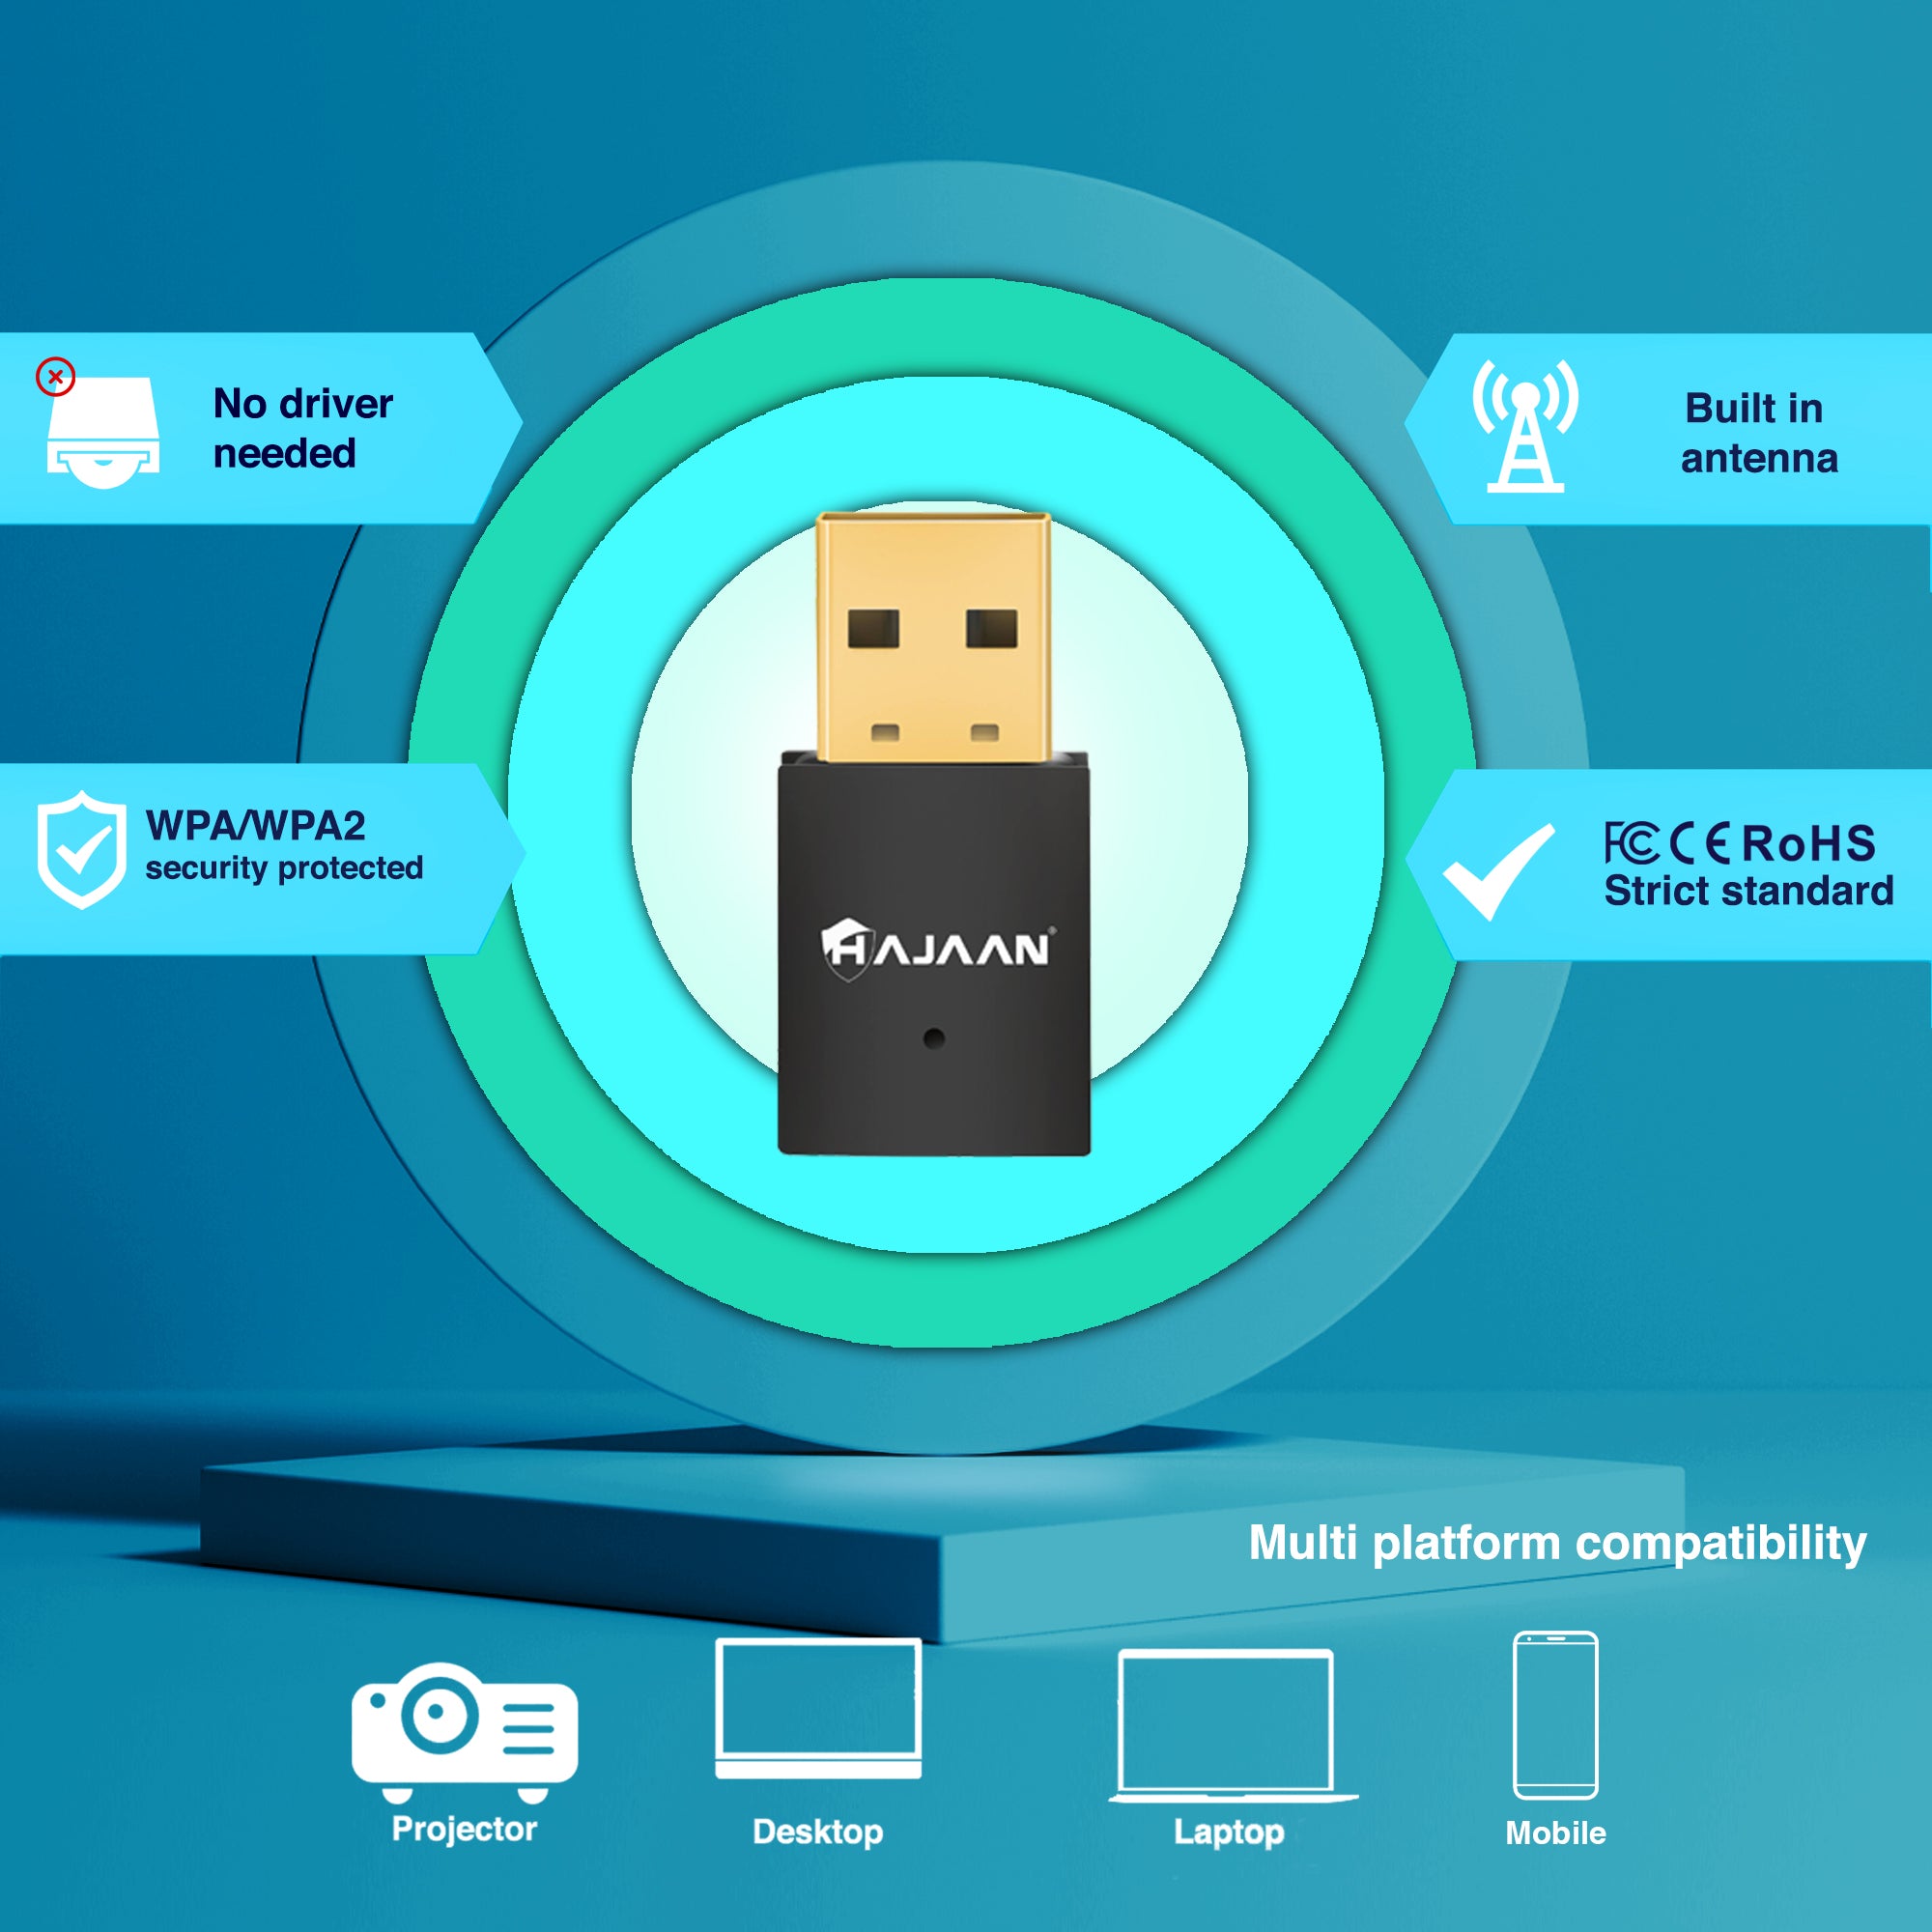 HAJAAN 300Mbps USB WiFi Adapter Plug and Play WiFi Dongle for PC Desktop, Laptop, Wireless Network Adapter Support Windows 10, 8, 7, Vista, XP, Mac OS